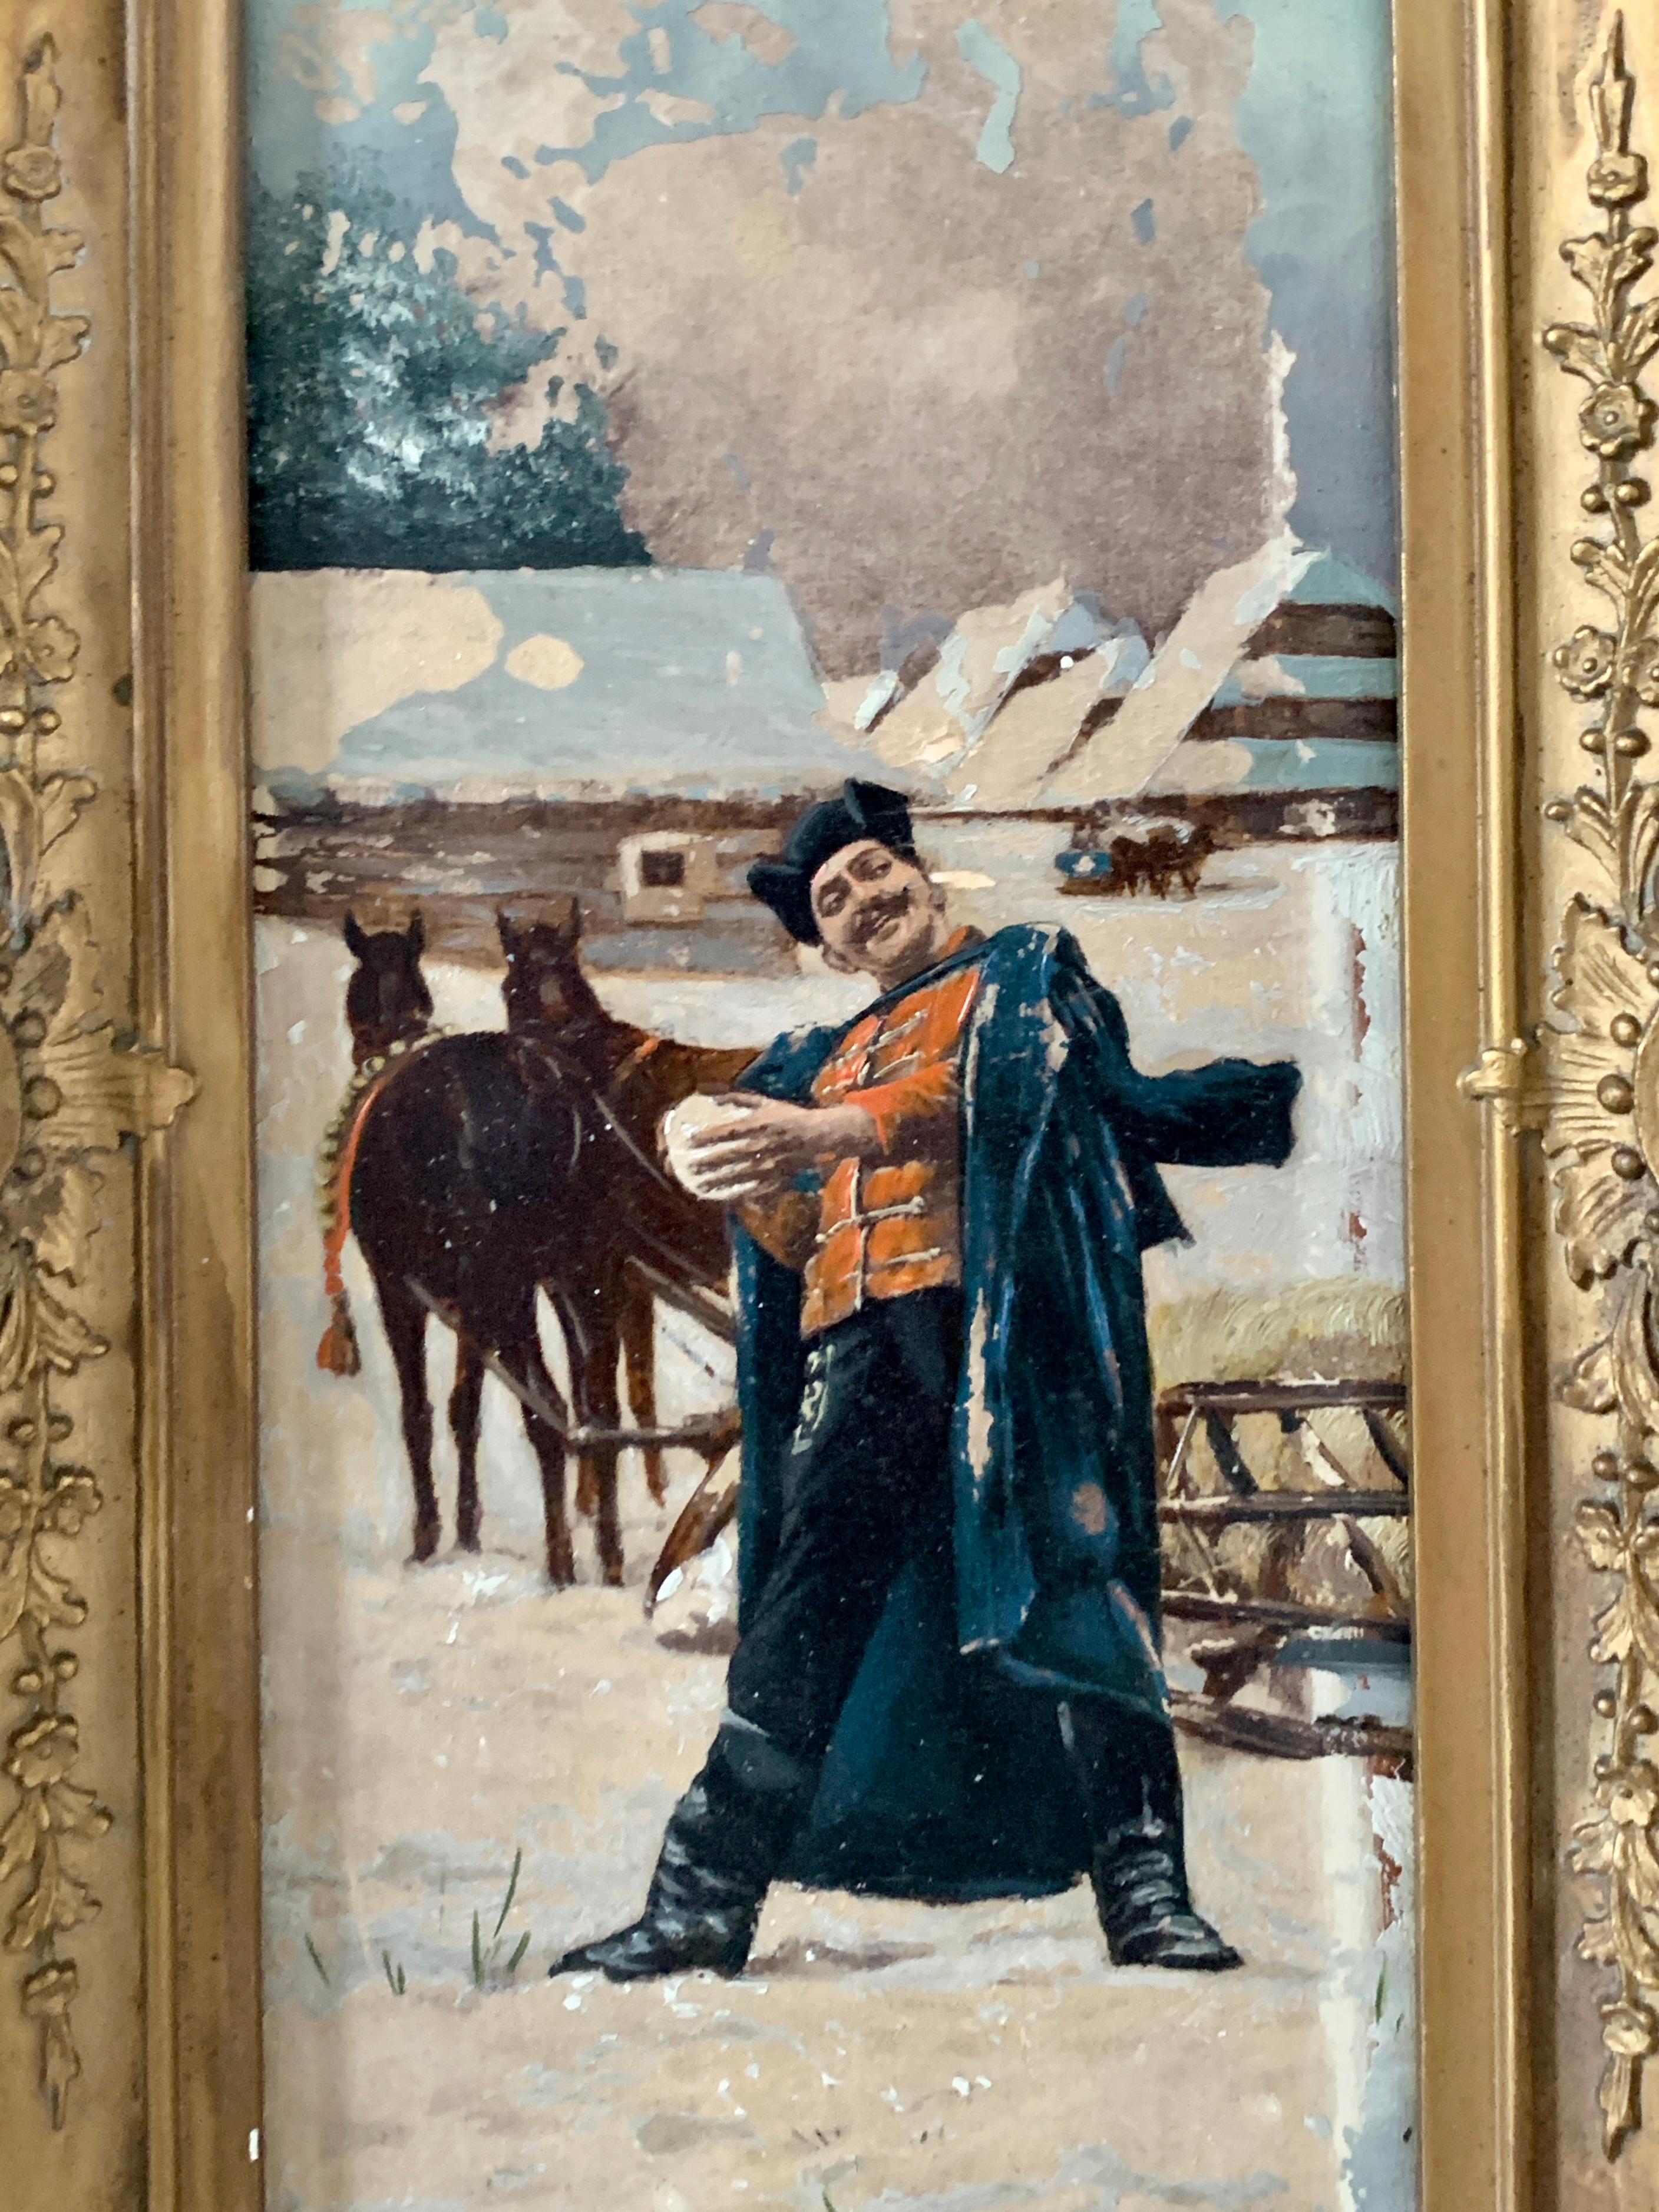 A gorgeous and charming pair of Victorian framed oil paintings of a snowball fight with a village in the background.

Russia, late 19th century

Oil on board, gilt frame

Measures: 6.63